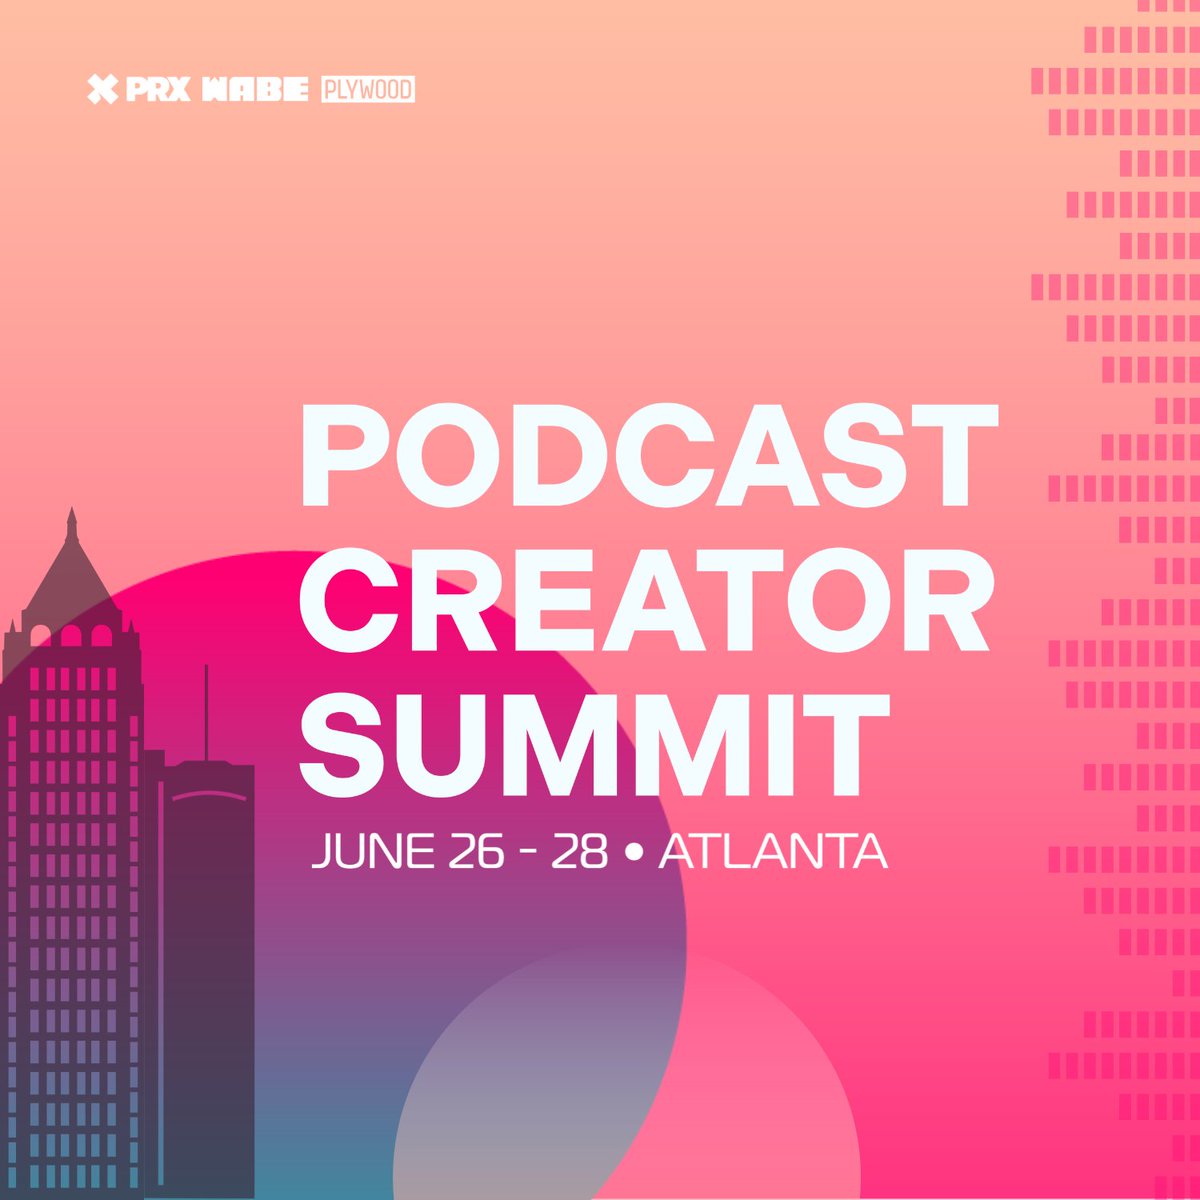 And we’re back with our SECOND PRX Podcast Creator Summit…this time at Plywood Place @PlywoodPeople in Atlanta in partnership with WABE @wabeatl.  Events are FREE and now open for registration, which is required. We can’t wait to see you!
bit.ly/45baZNh